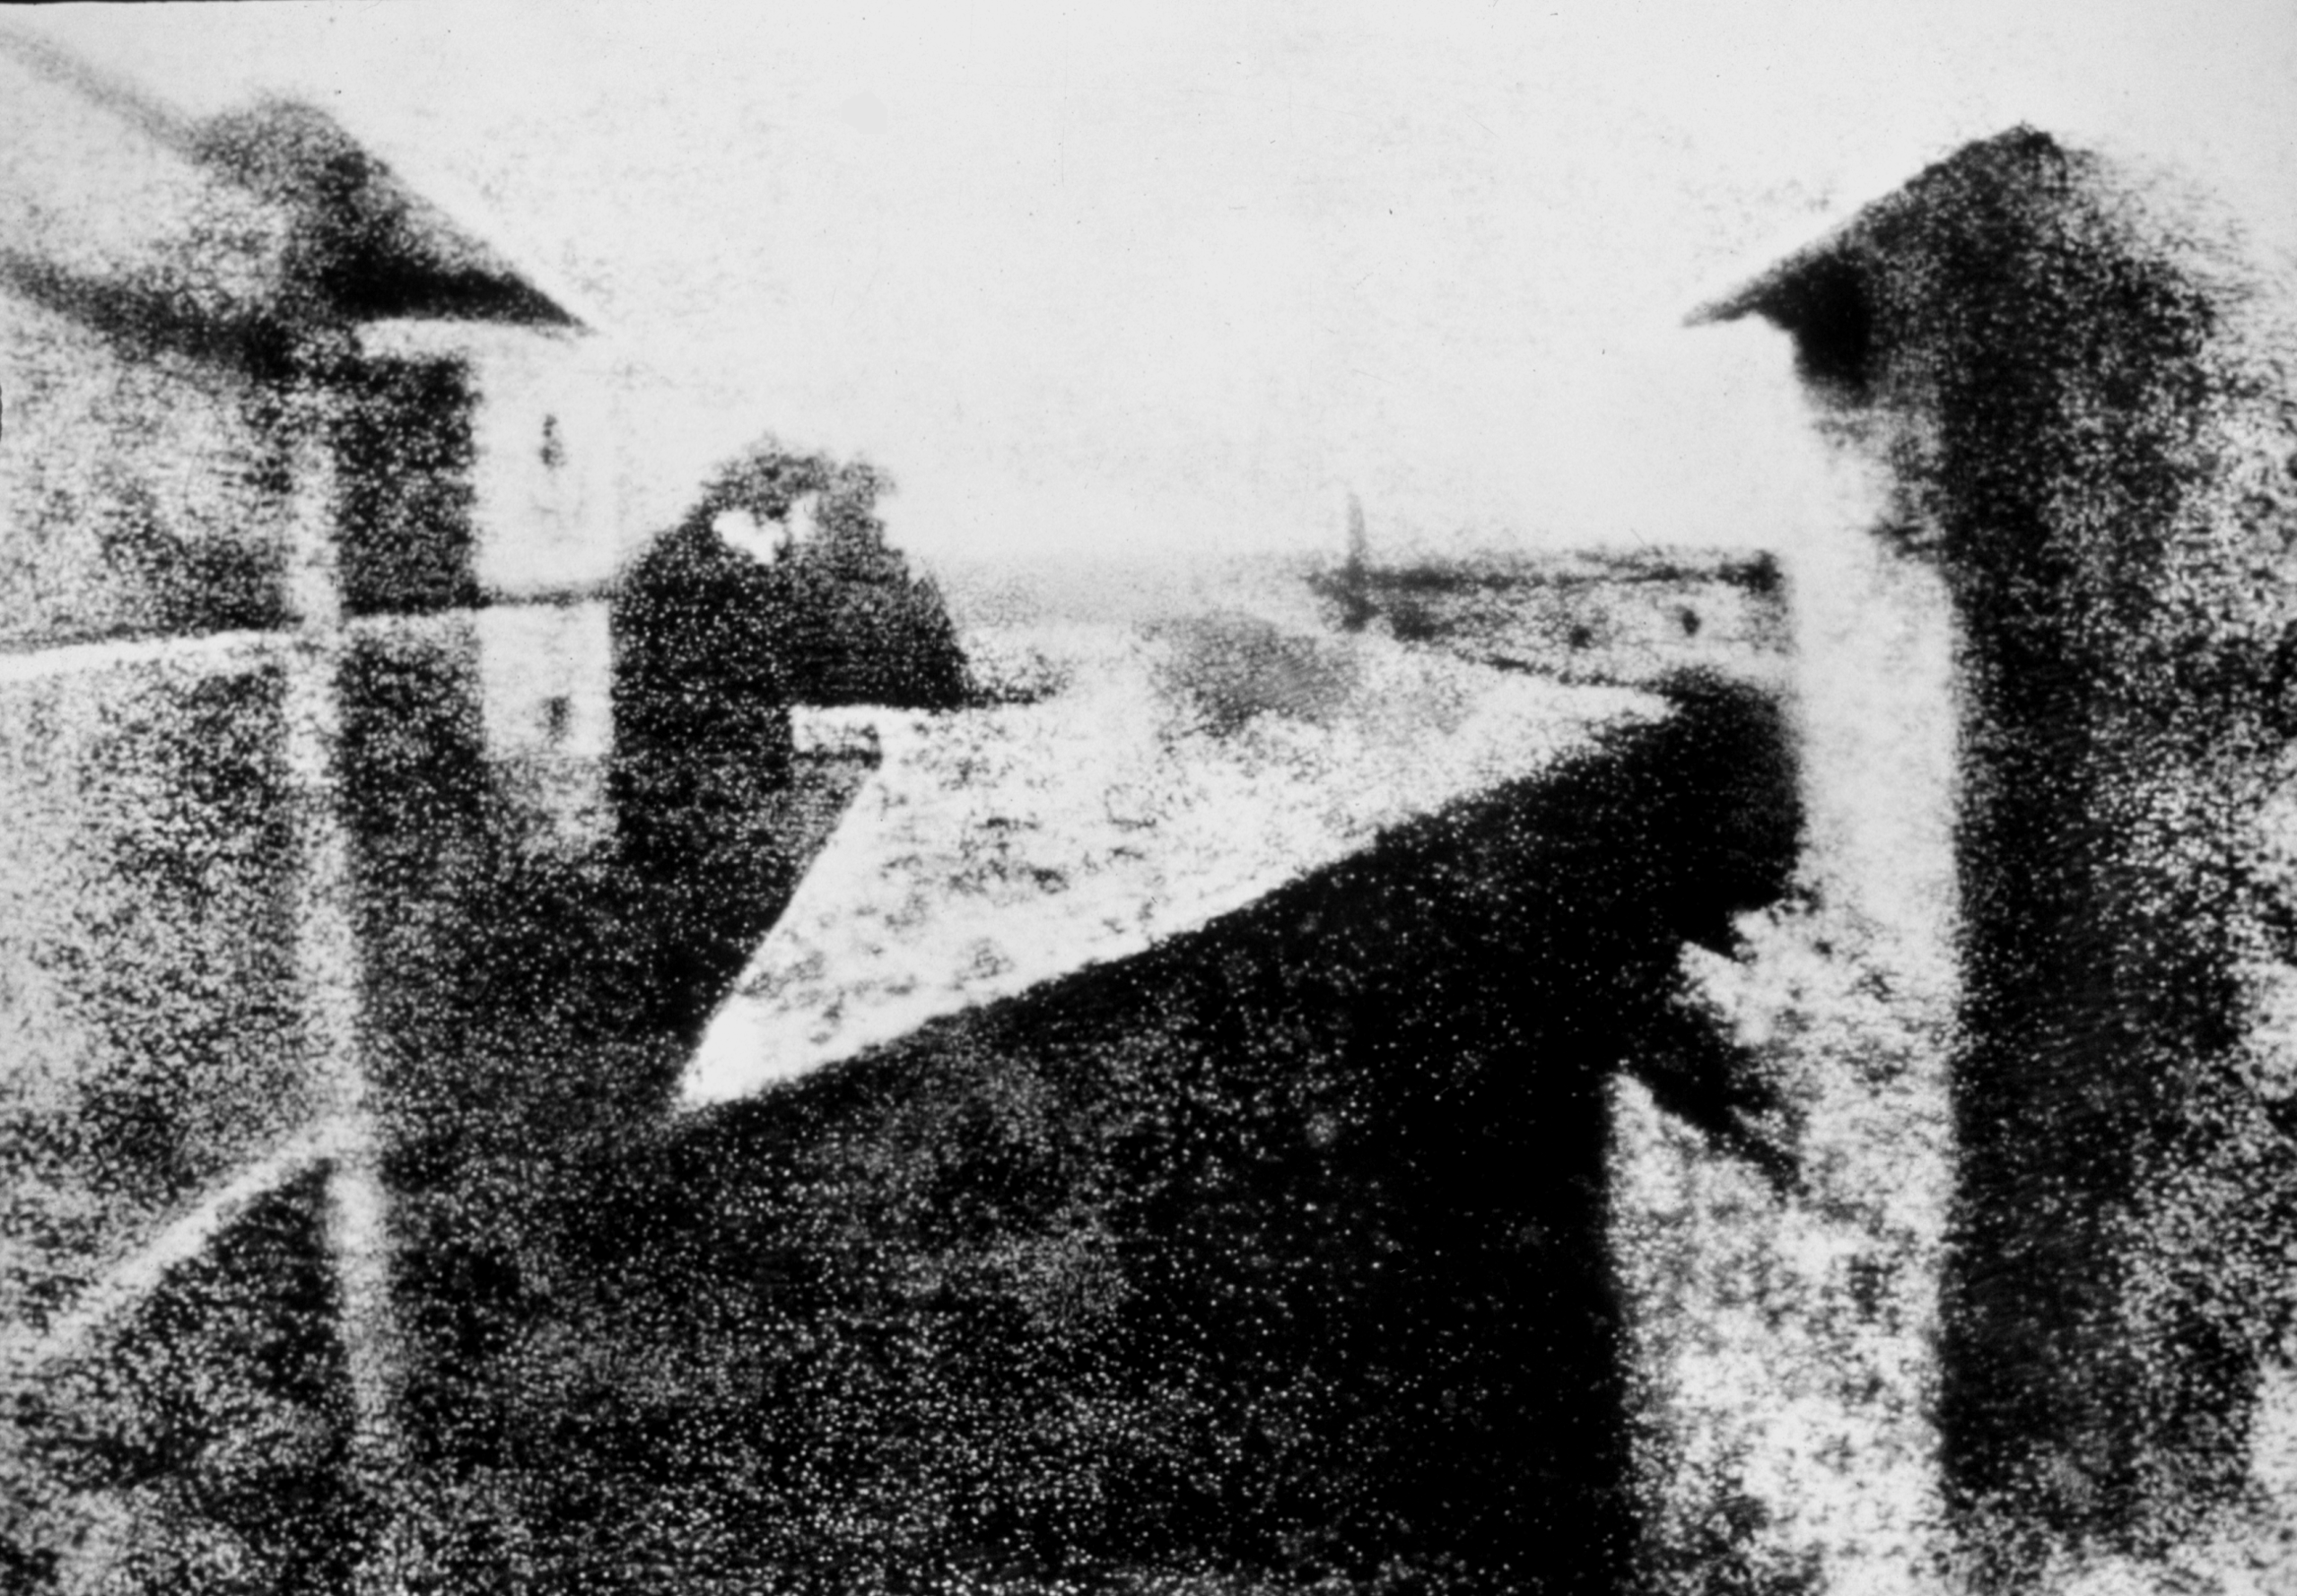 View_from_the_Window_at_Le_Gras,_Joseph_Nicéphore_Niépce,_uncompressed_UMN_source